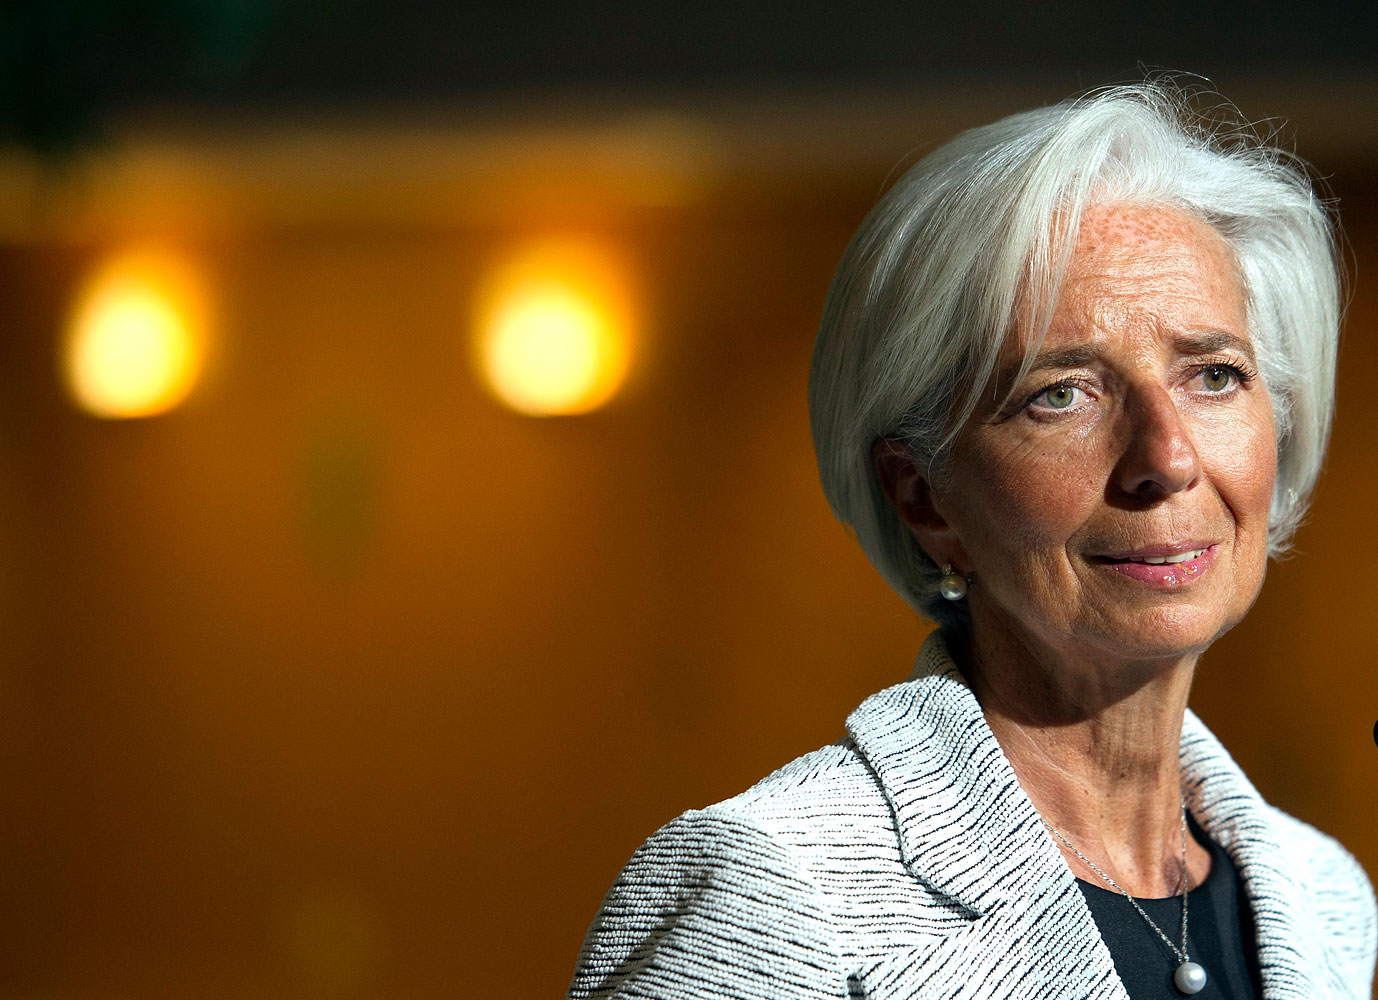 International Monetary Fund Managing Director Christine Lagarde makes a statement about sanctions leveled against Russia, during a news conference following an IMF Executive Board meeting at IMF Headquarters in Washington, April 30, 2014.